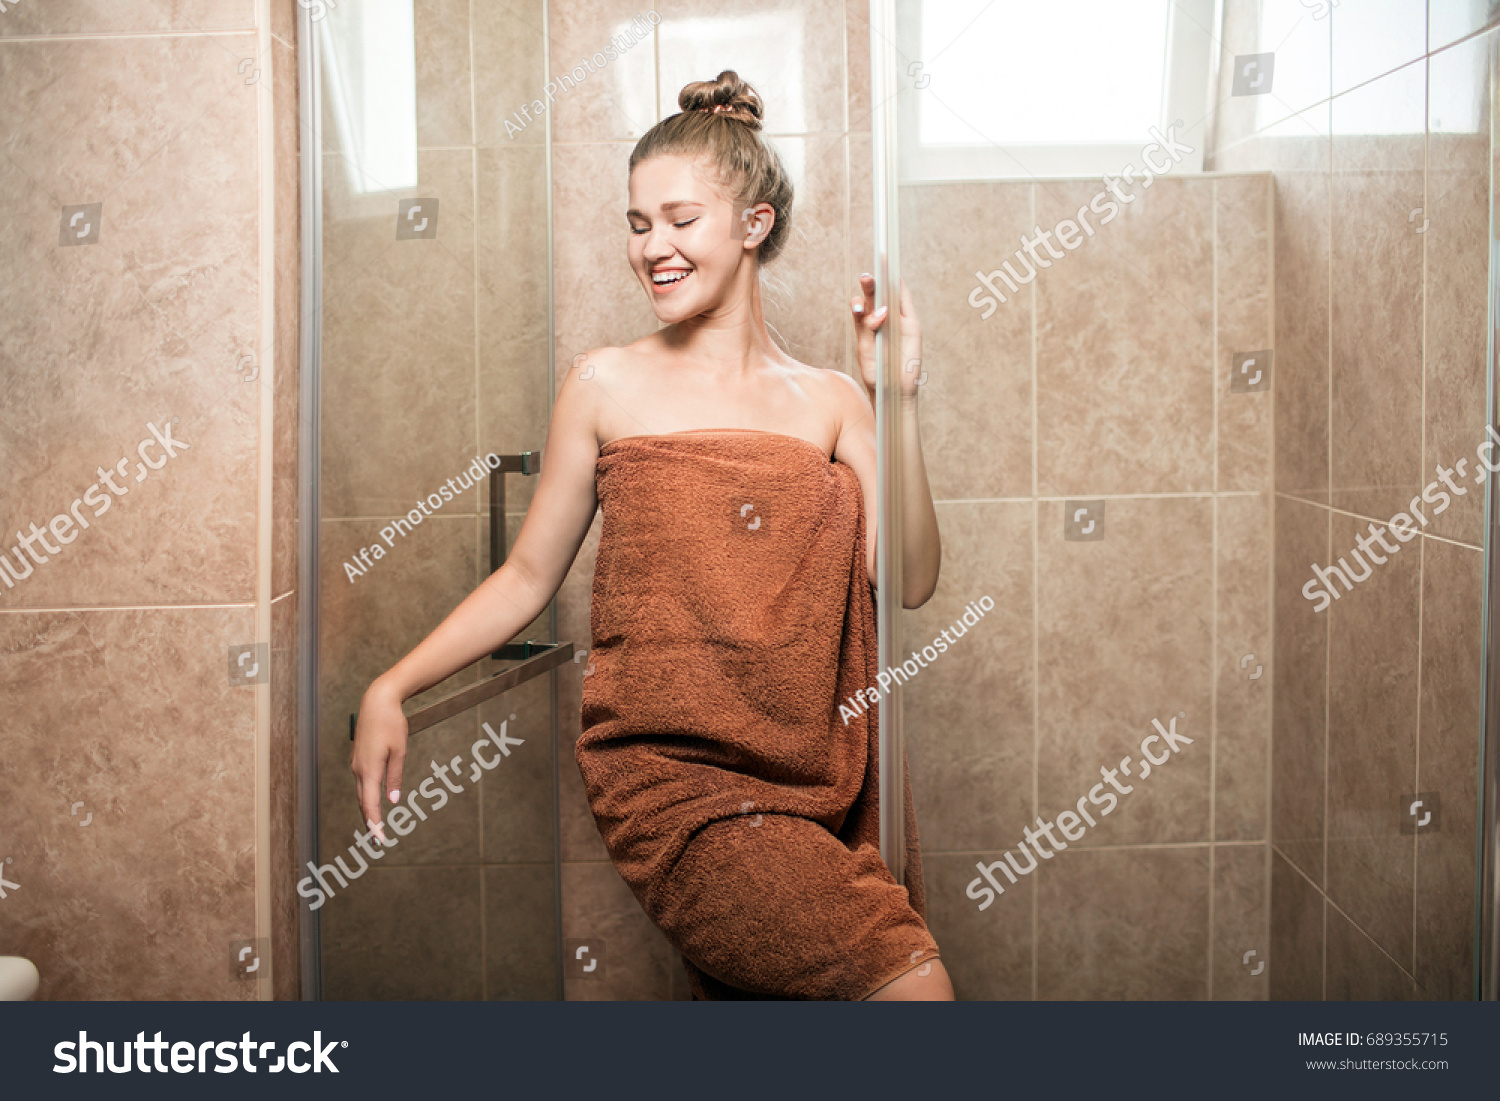 Sexy Girls In The Shower